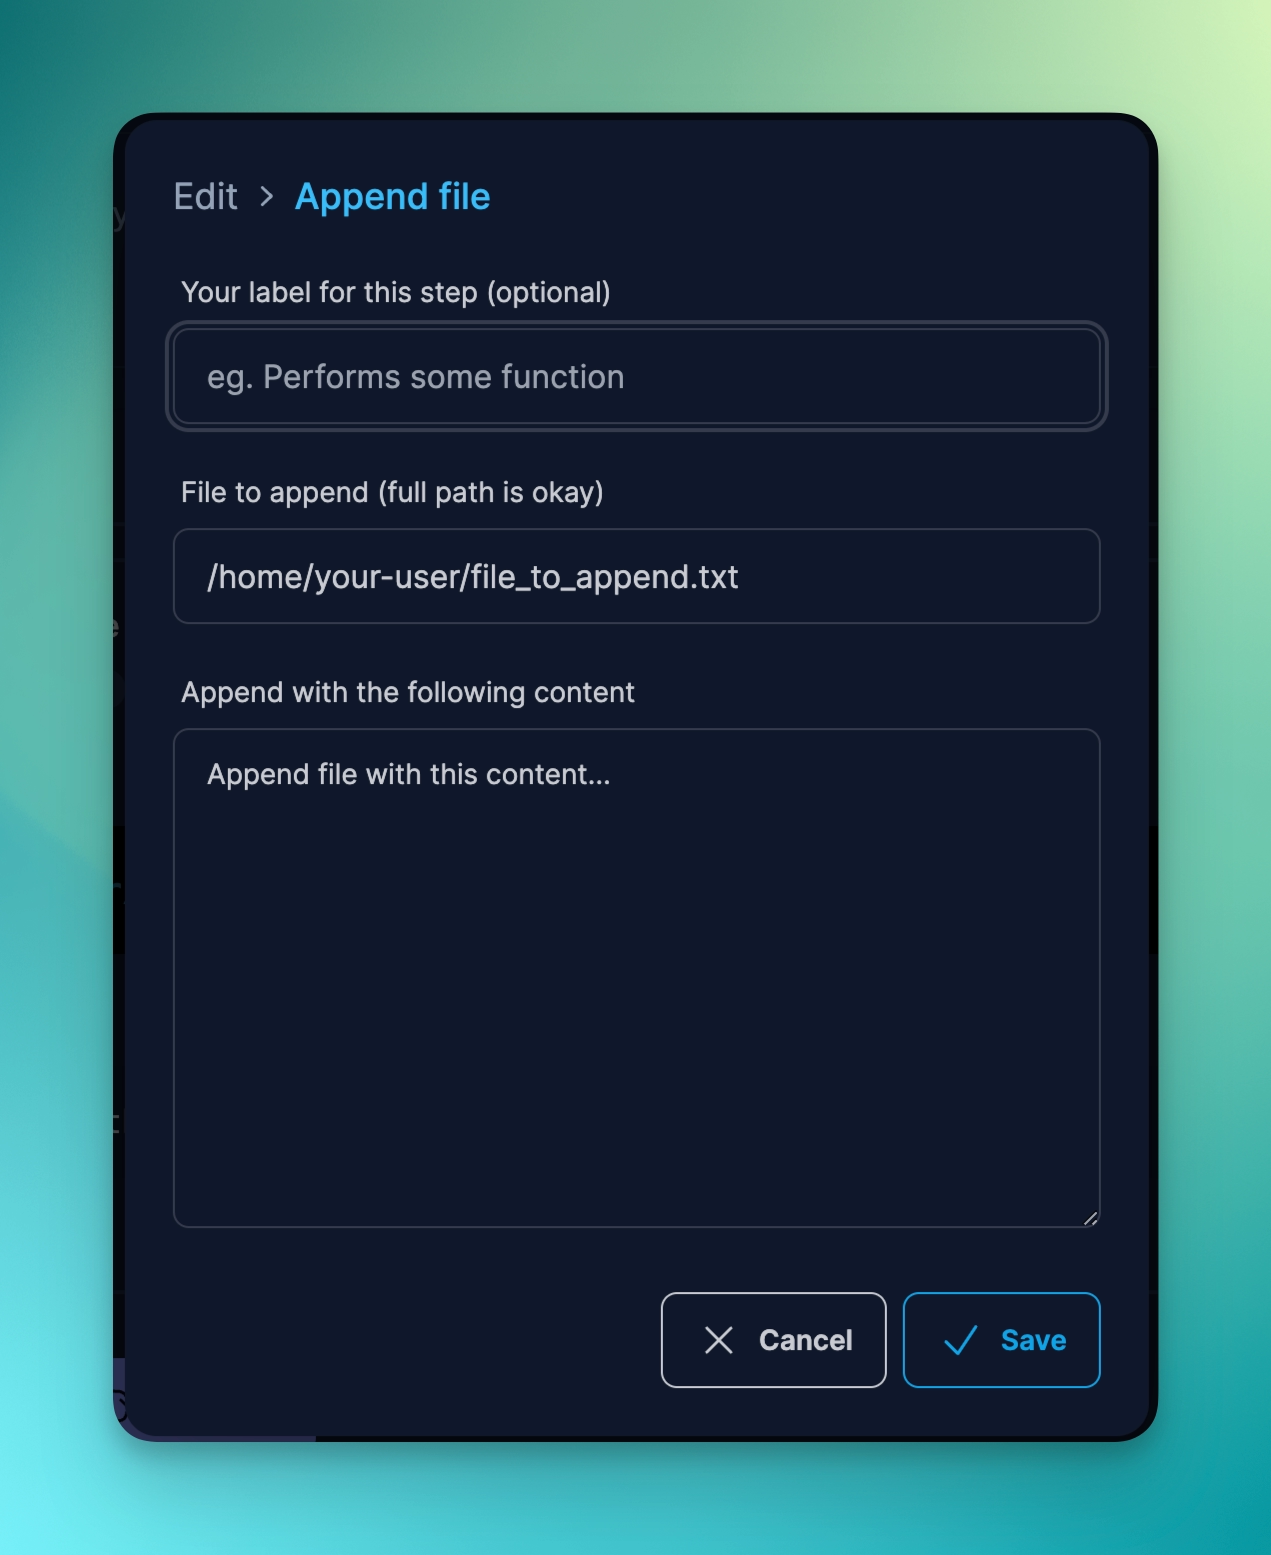 Append file directive settings